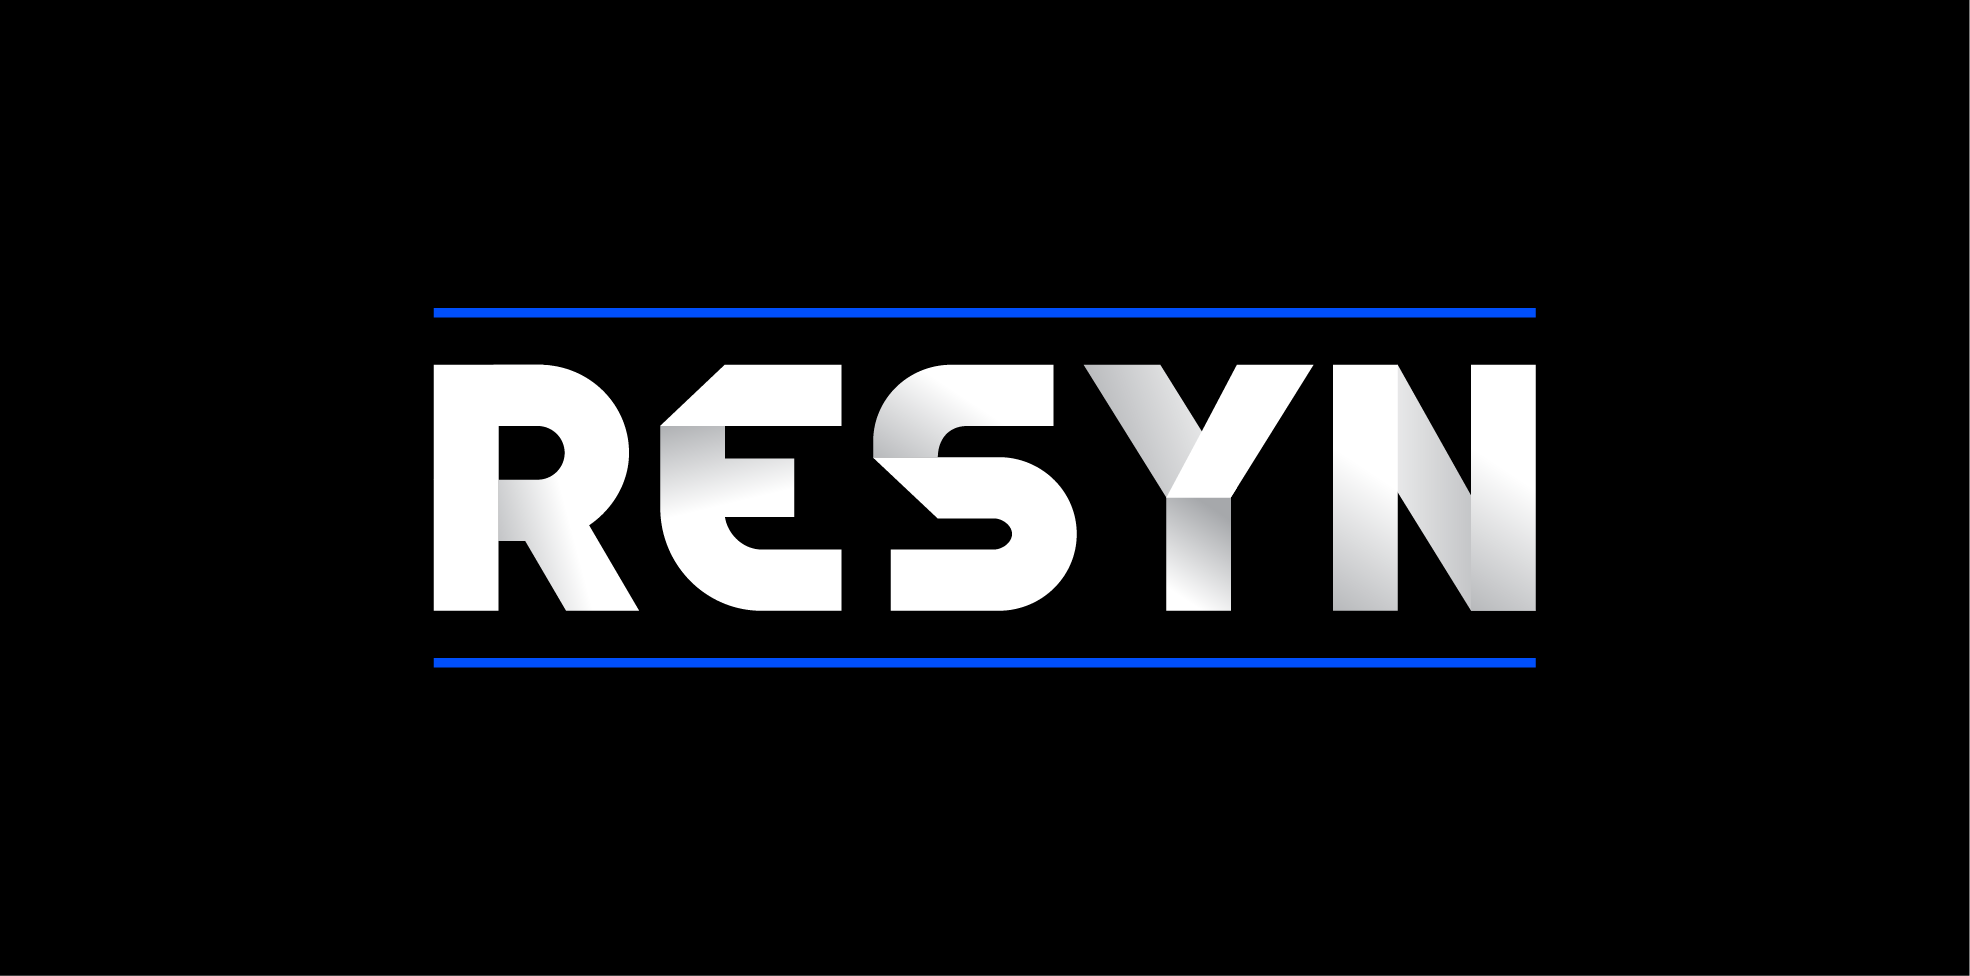 RESYN black logo RESYN has a 40 year heritage in delivering high performance resin surfacing services. We take pride in our seamless, comprehensive and long lasting approach – working as an extension of the client’s team, minimising disruption and developing continuous partnerships.